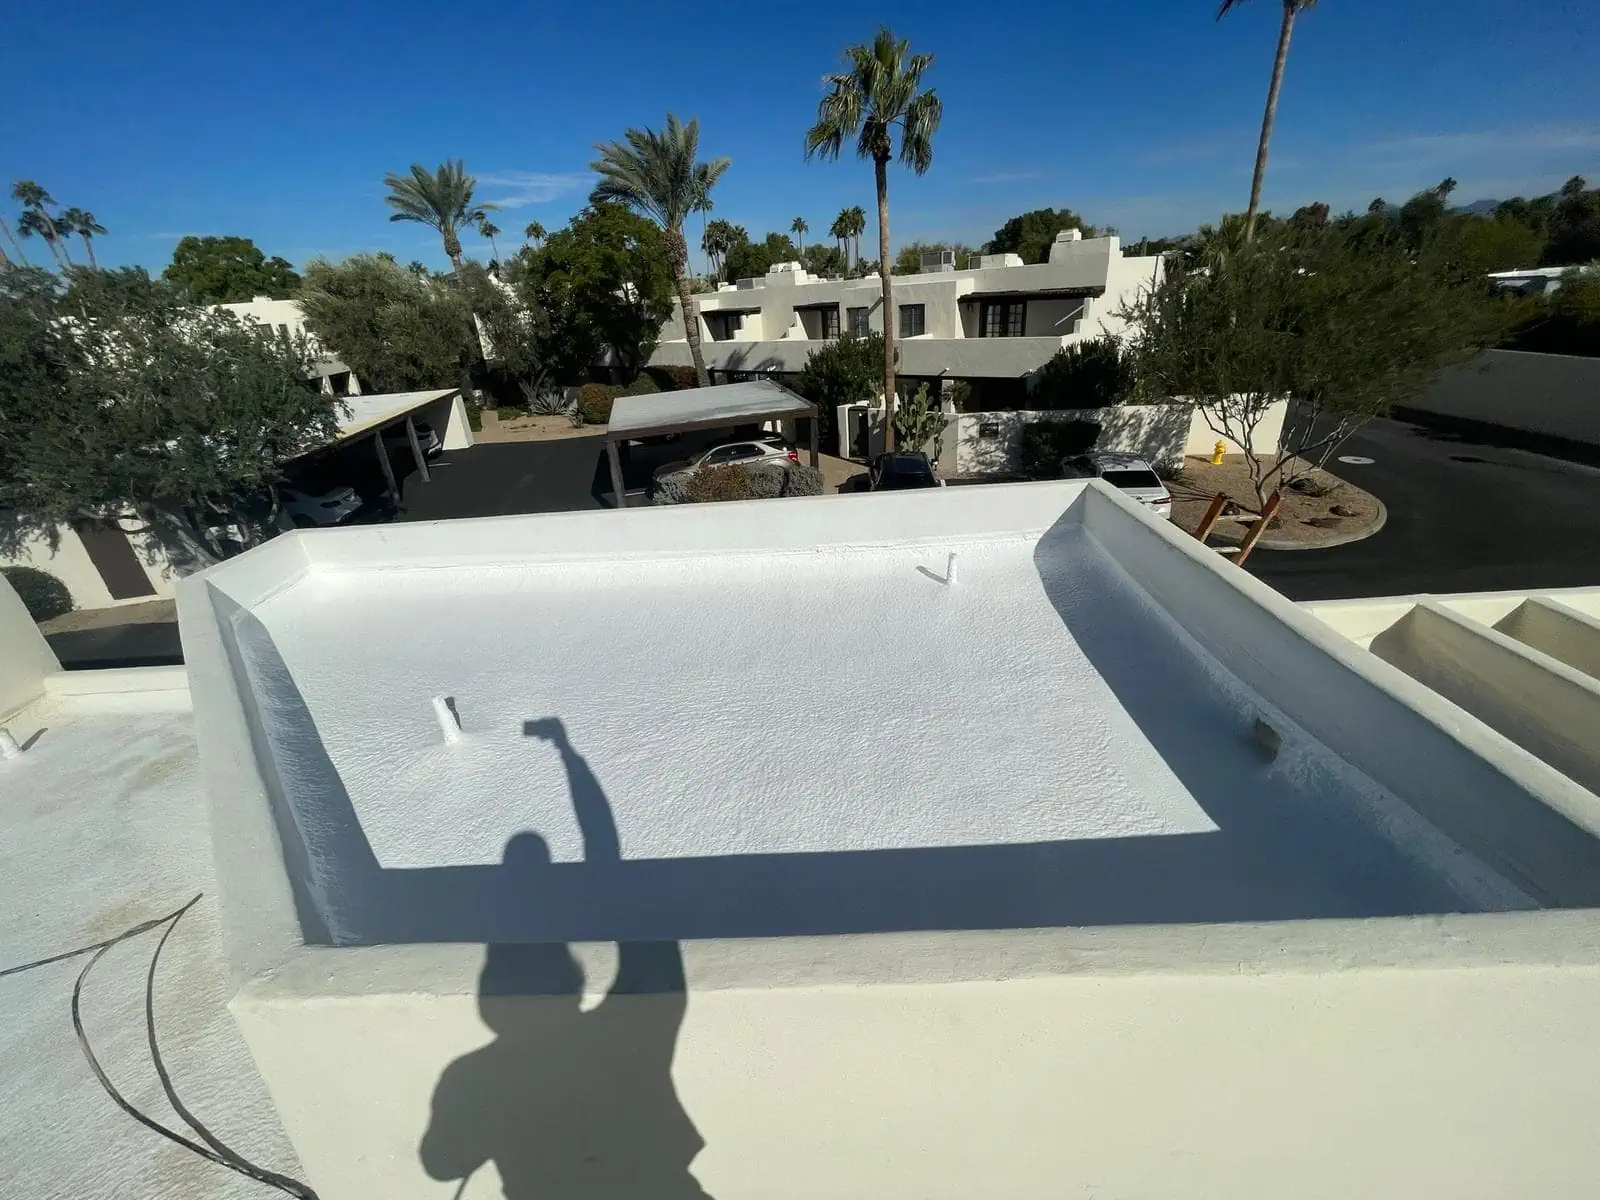 foam roof by paradise valley contractor